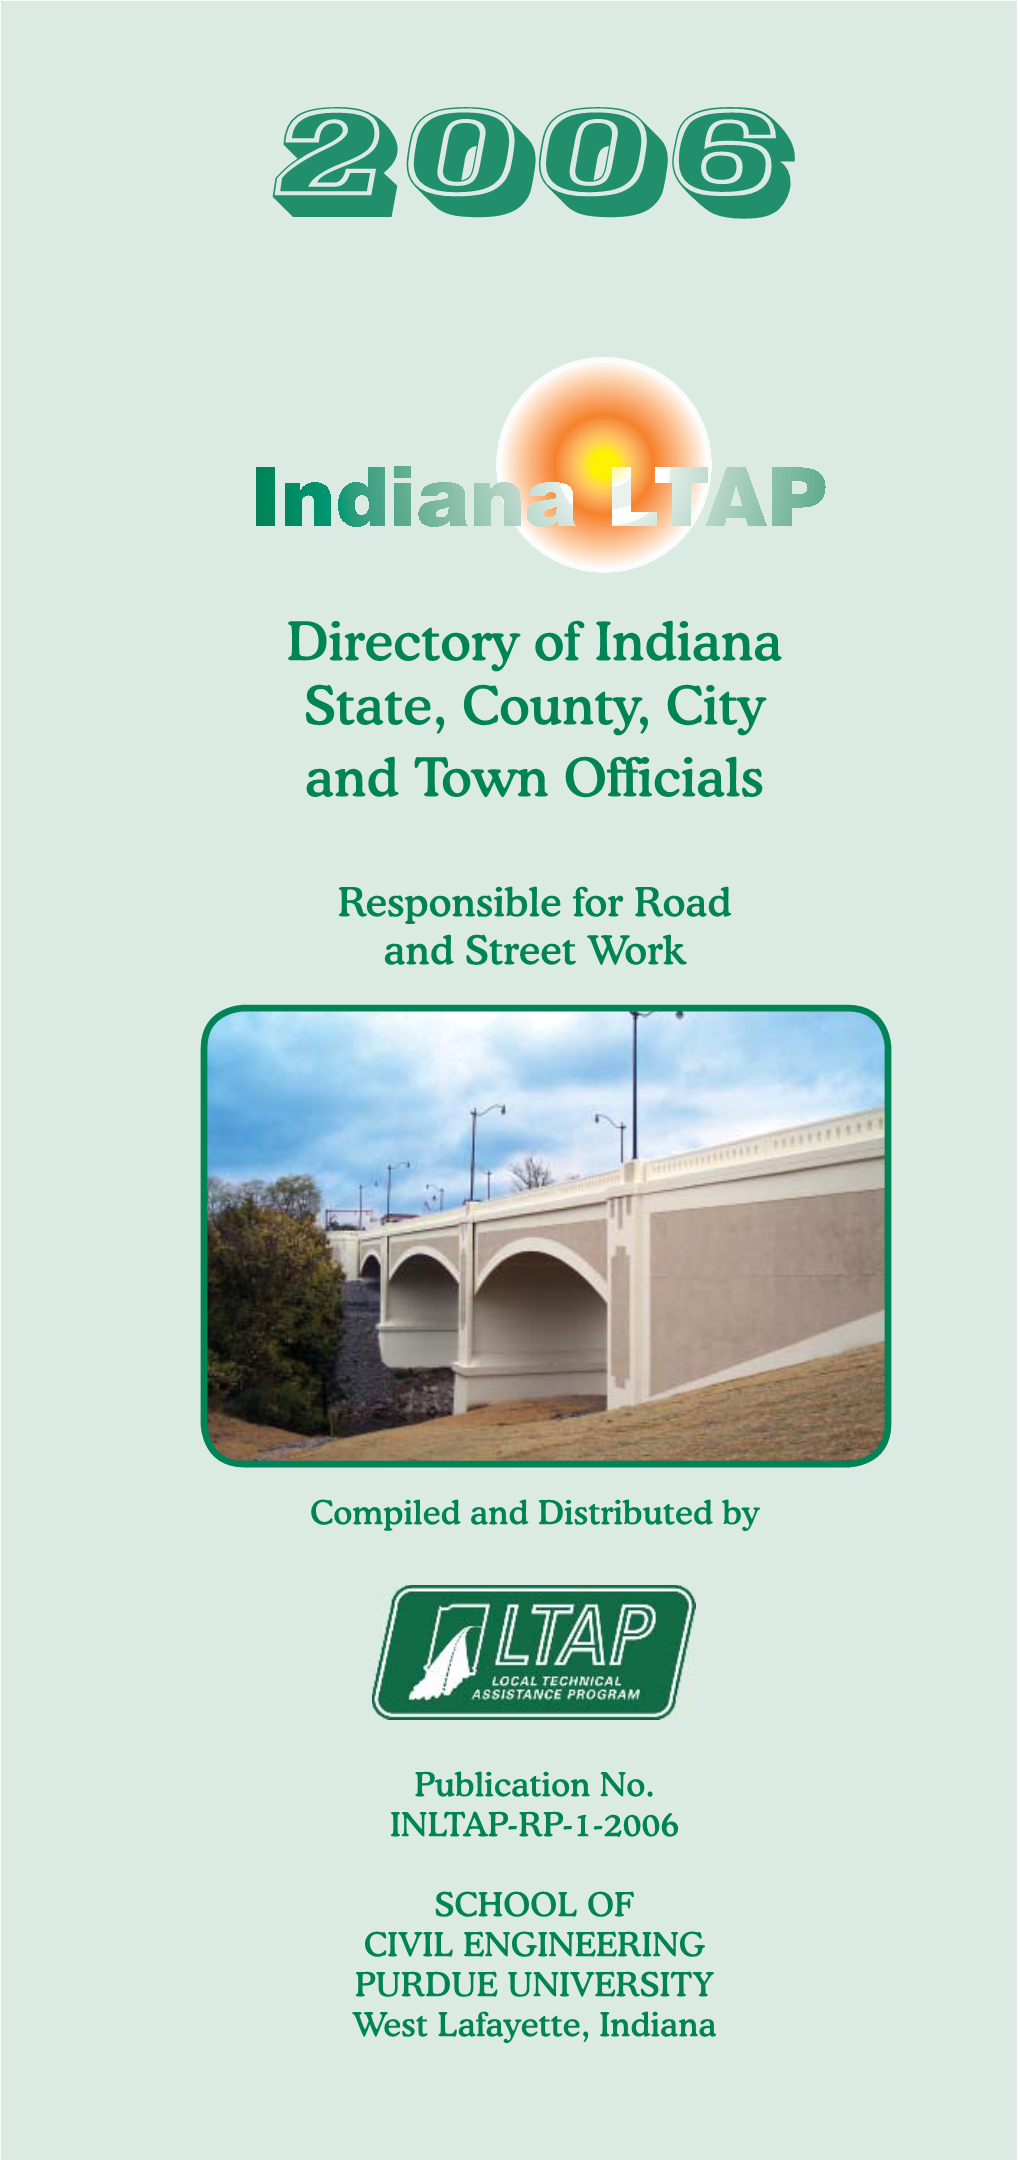 2006 Directory of Indiana State, County, City and Town Officials